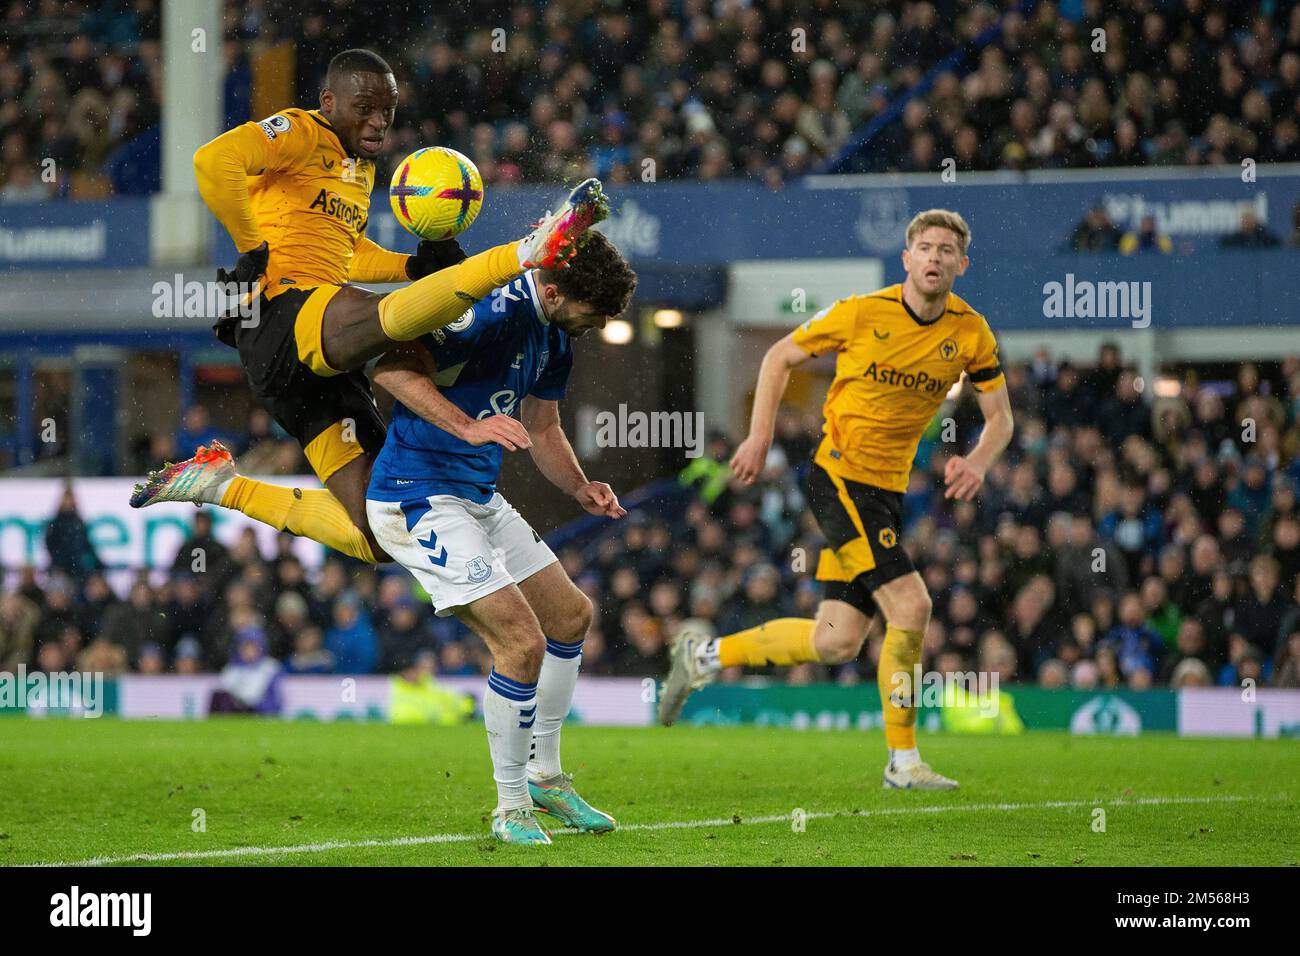 Toti Gomes #24 of Wolverhampton Wanderers comes close to Thomas Cannon #47 of Everton as he clears the ball during the Premier League match Everton vs Wolverhampton Wanderers at Goodison Park, Liverpool, United Kingdom, 26th December 2022  (Photo by Phil Bryan/News Images) Stock Photo